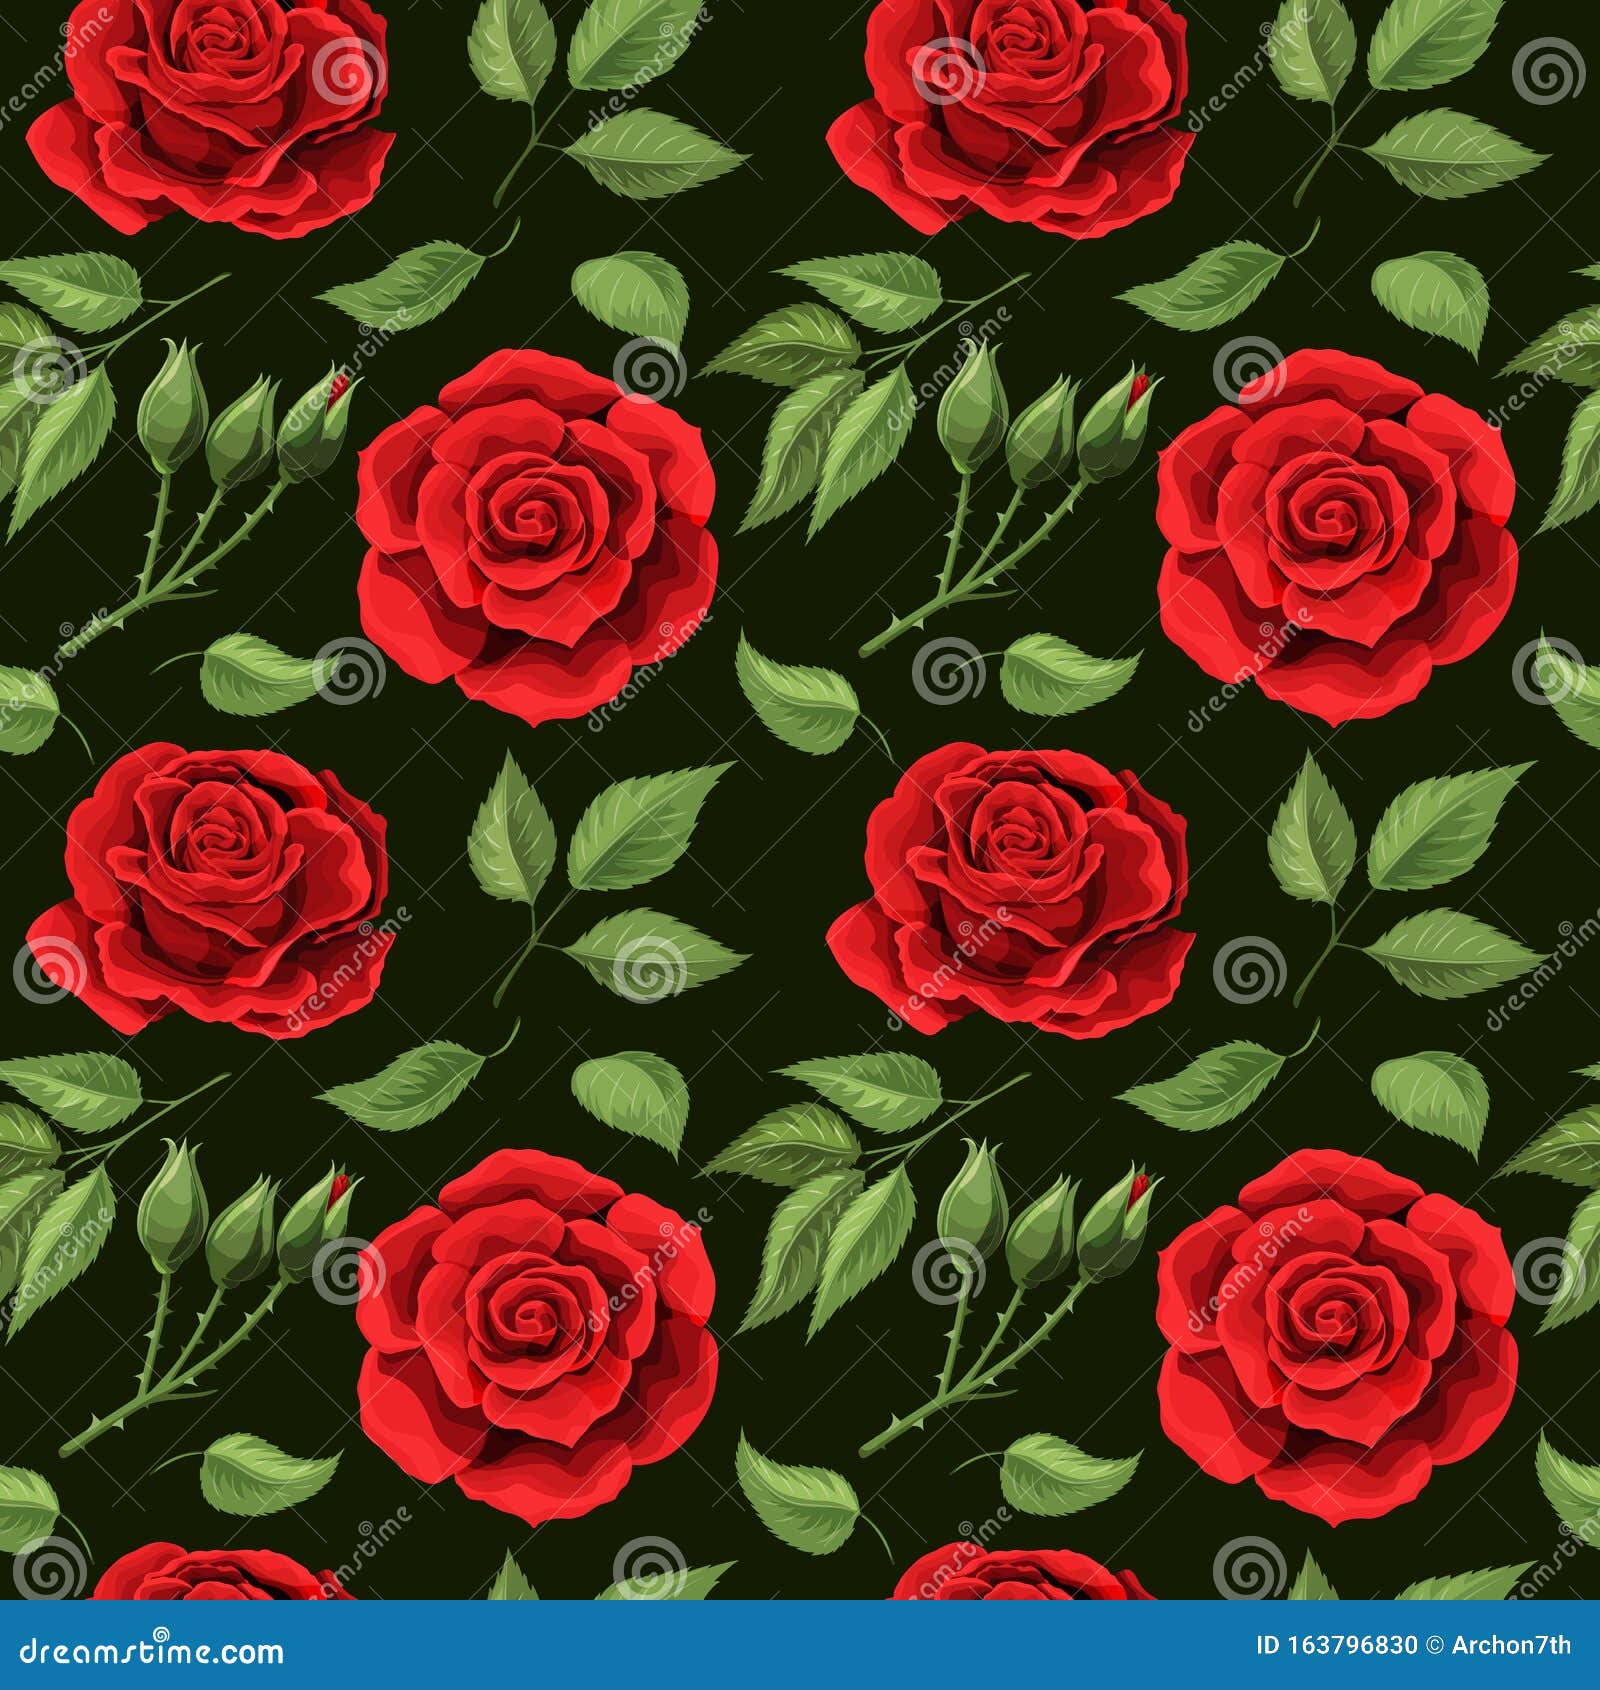 Red Roses Embroidery Seamless Pattern. Beautiful Buds of Red Roses on ...